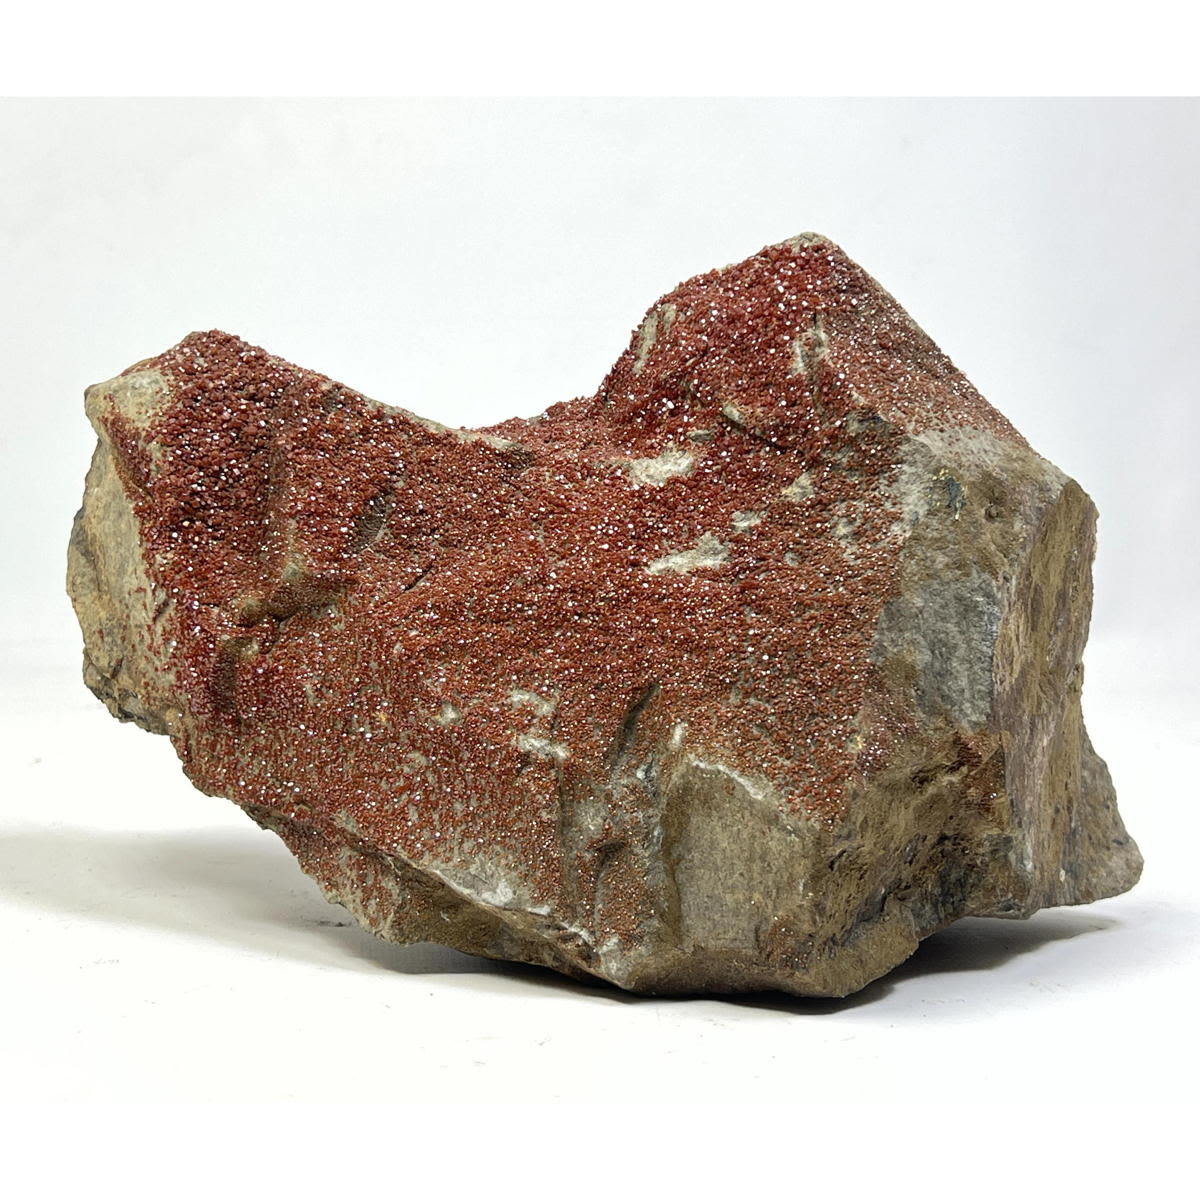 Mineral Specimen with small druzy